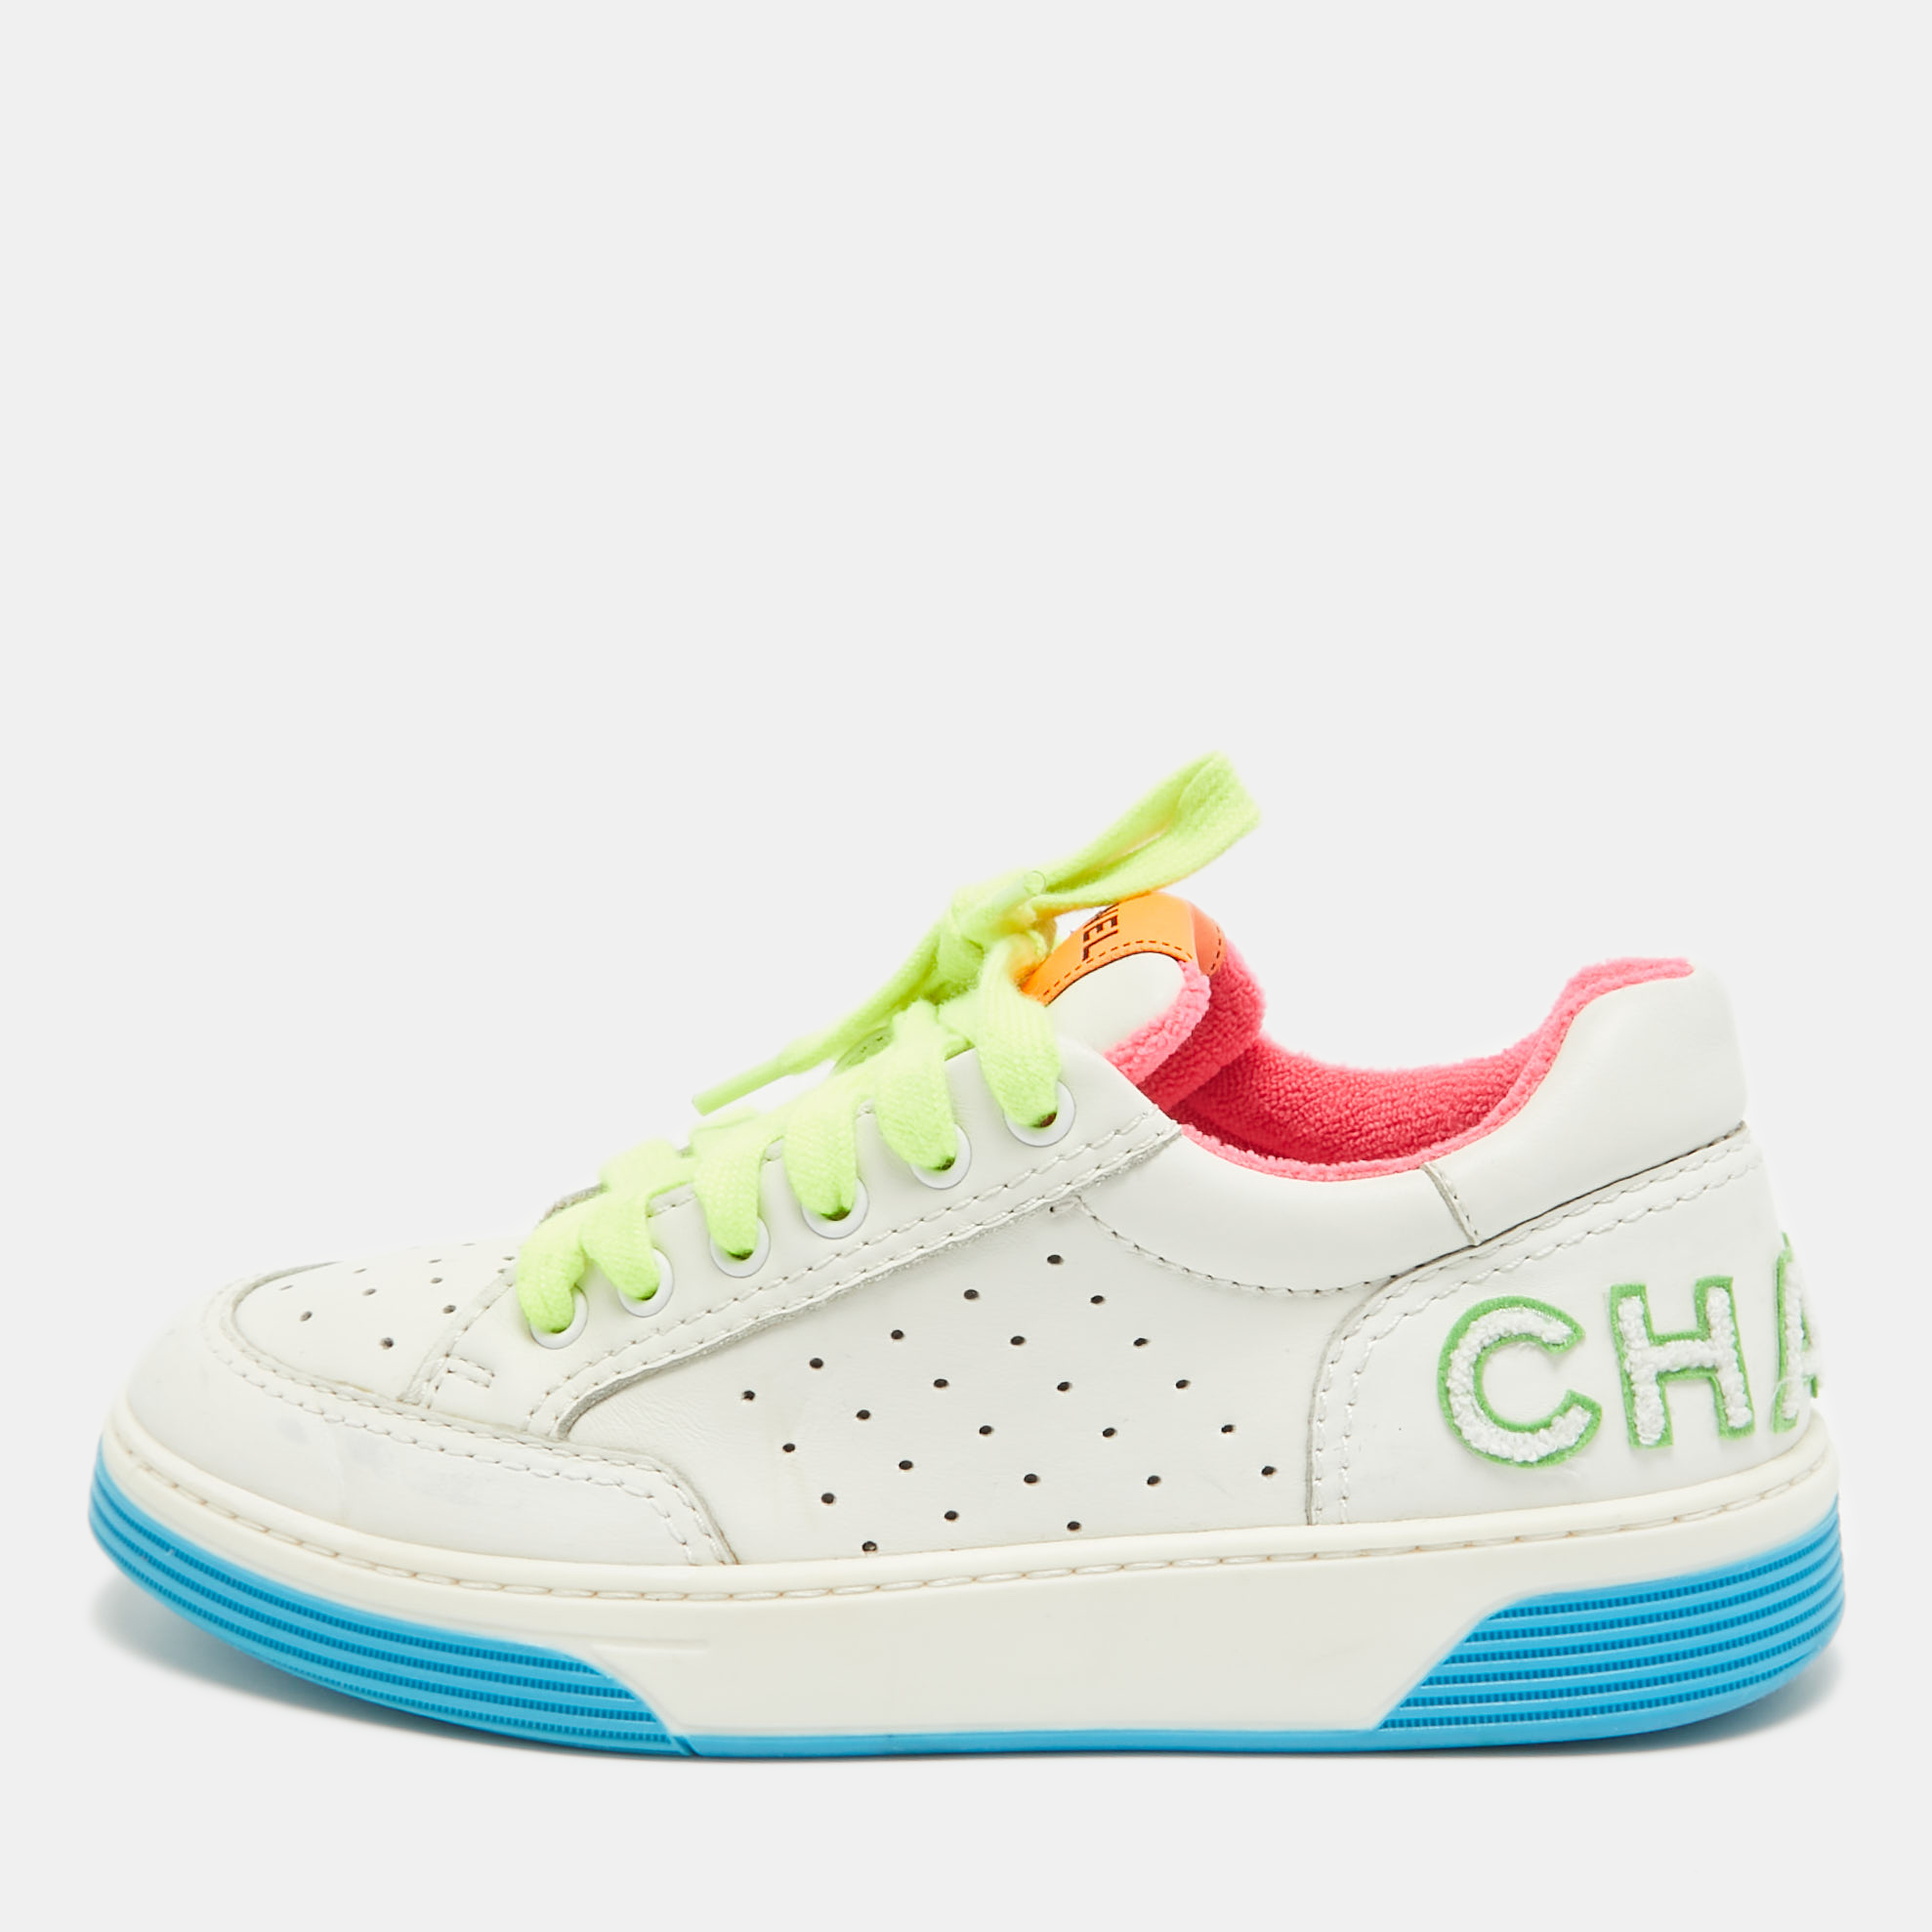 

Chanel White/Neon Leather Logo Low Top Sneakers Size